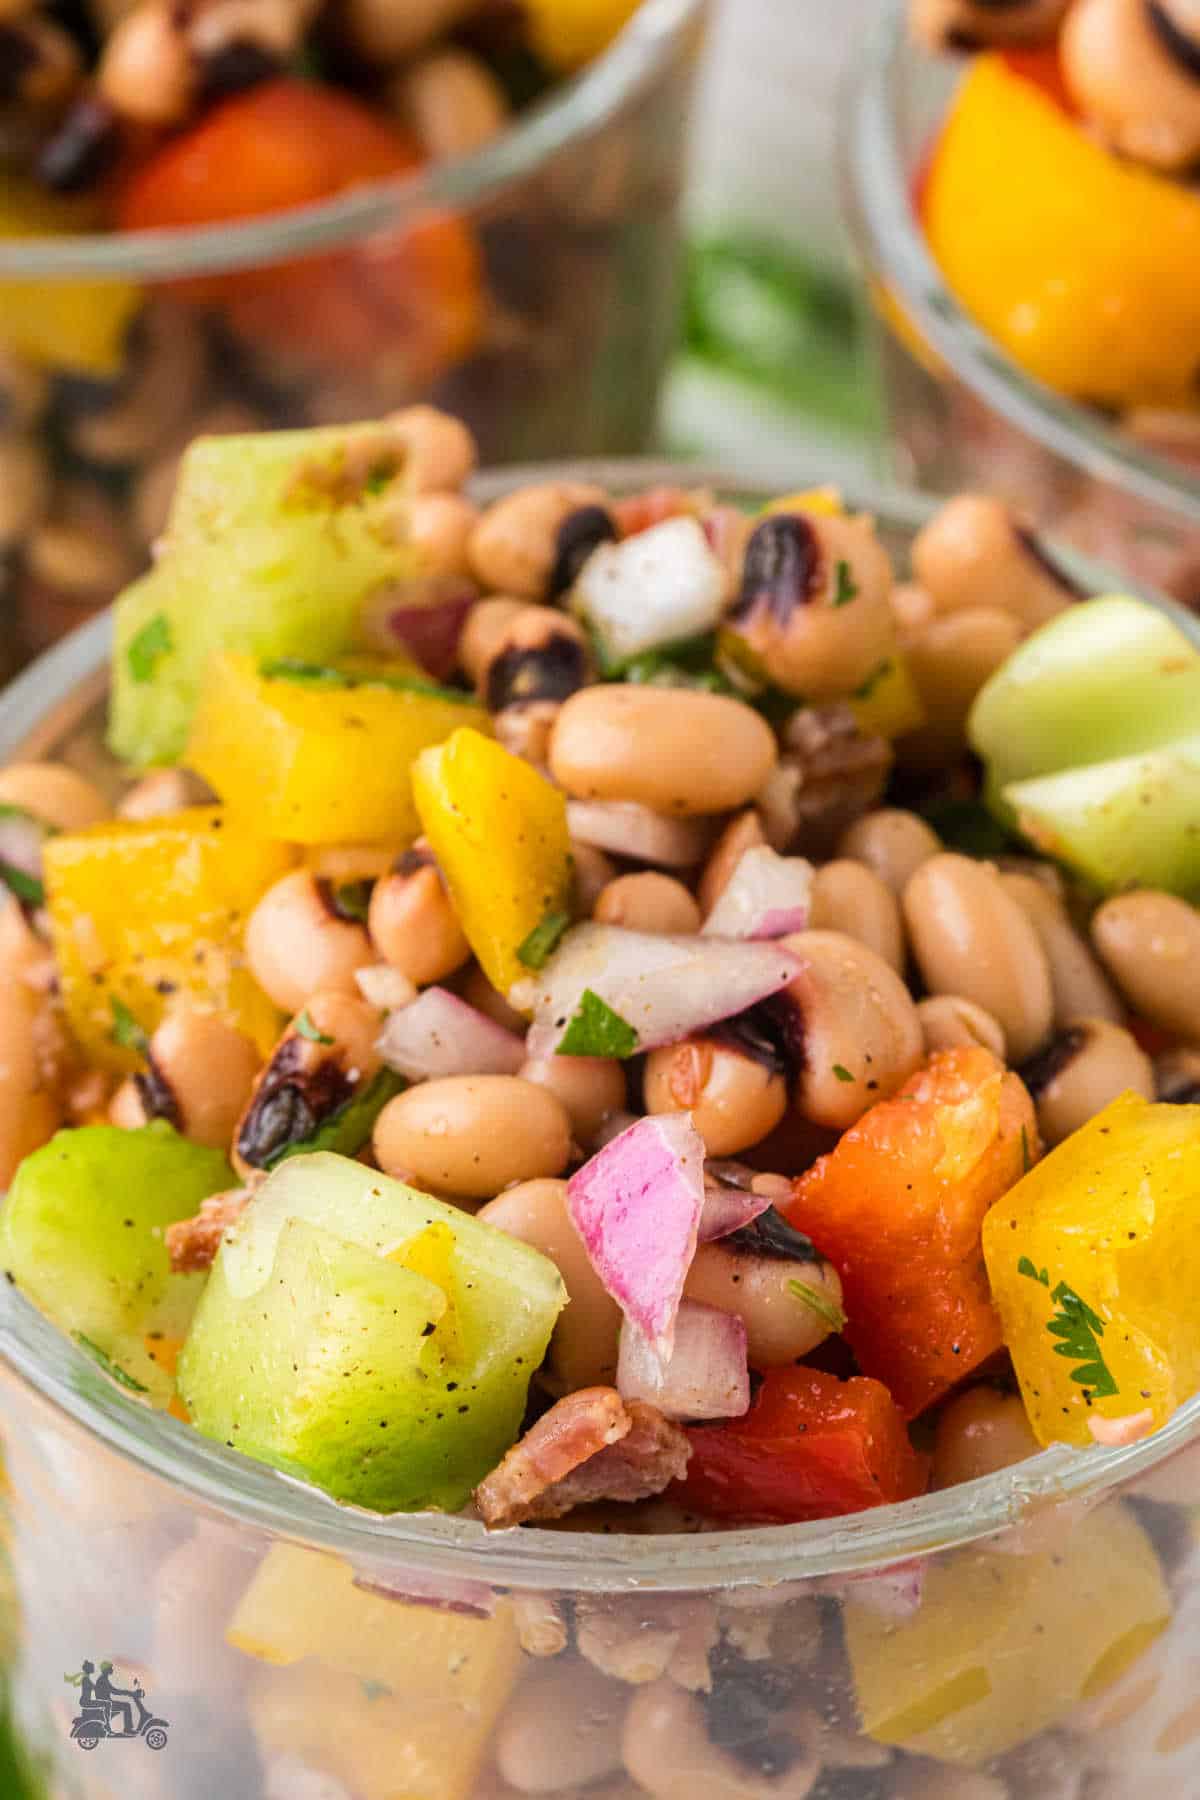 Southern-style black-eyed peas are marinated in a salad with colored bell peppers and marinated in a wine vinegar vinaigrette. 